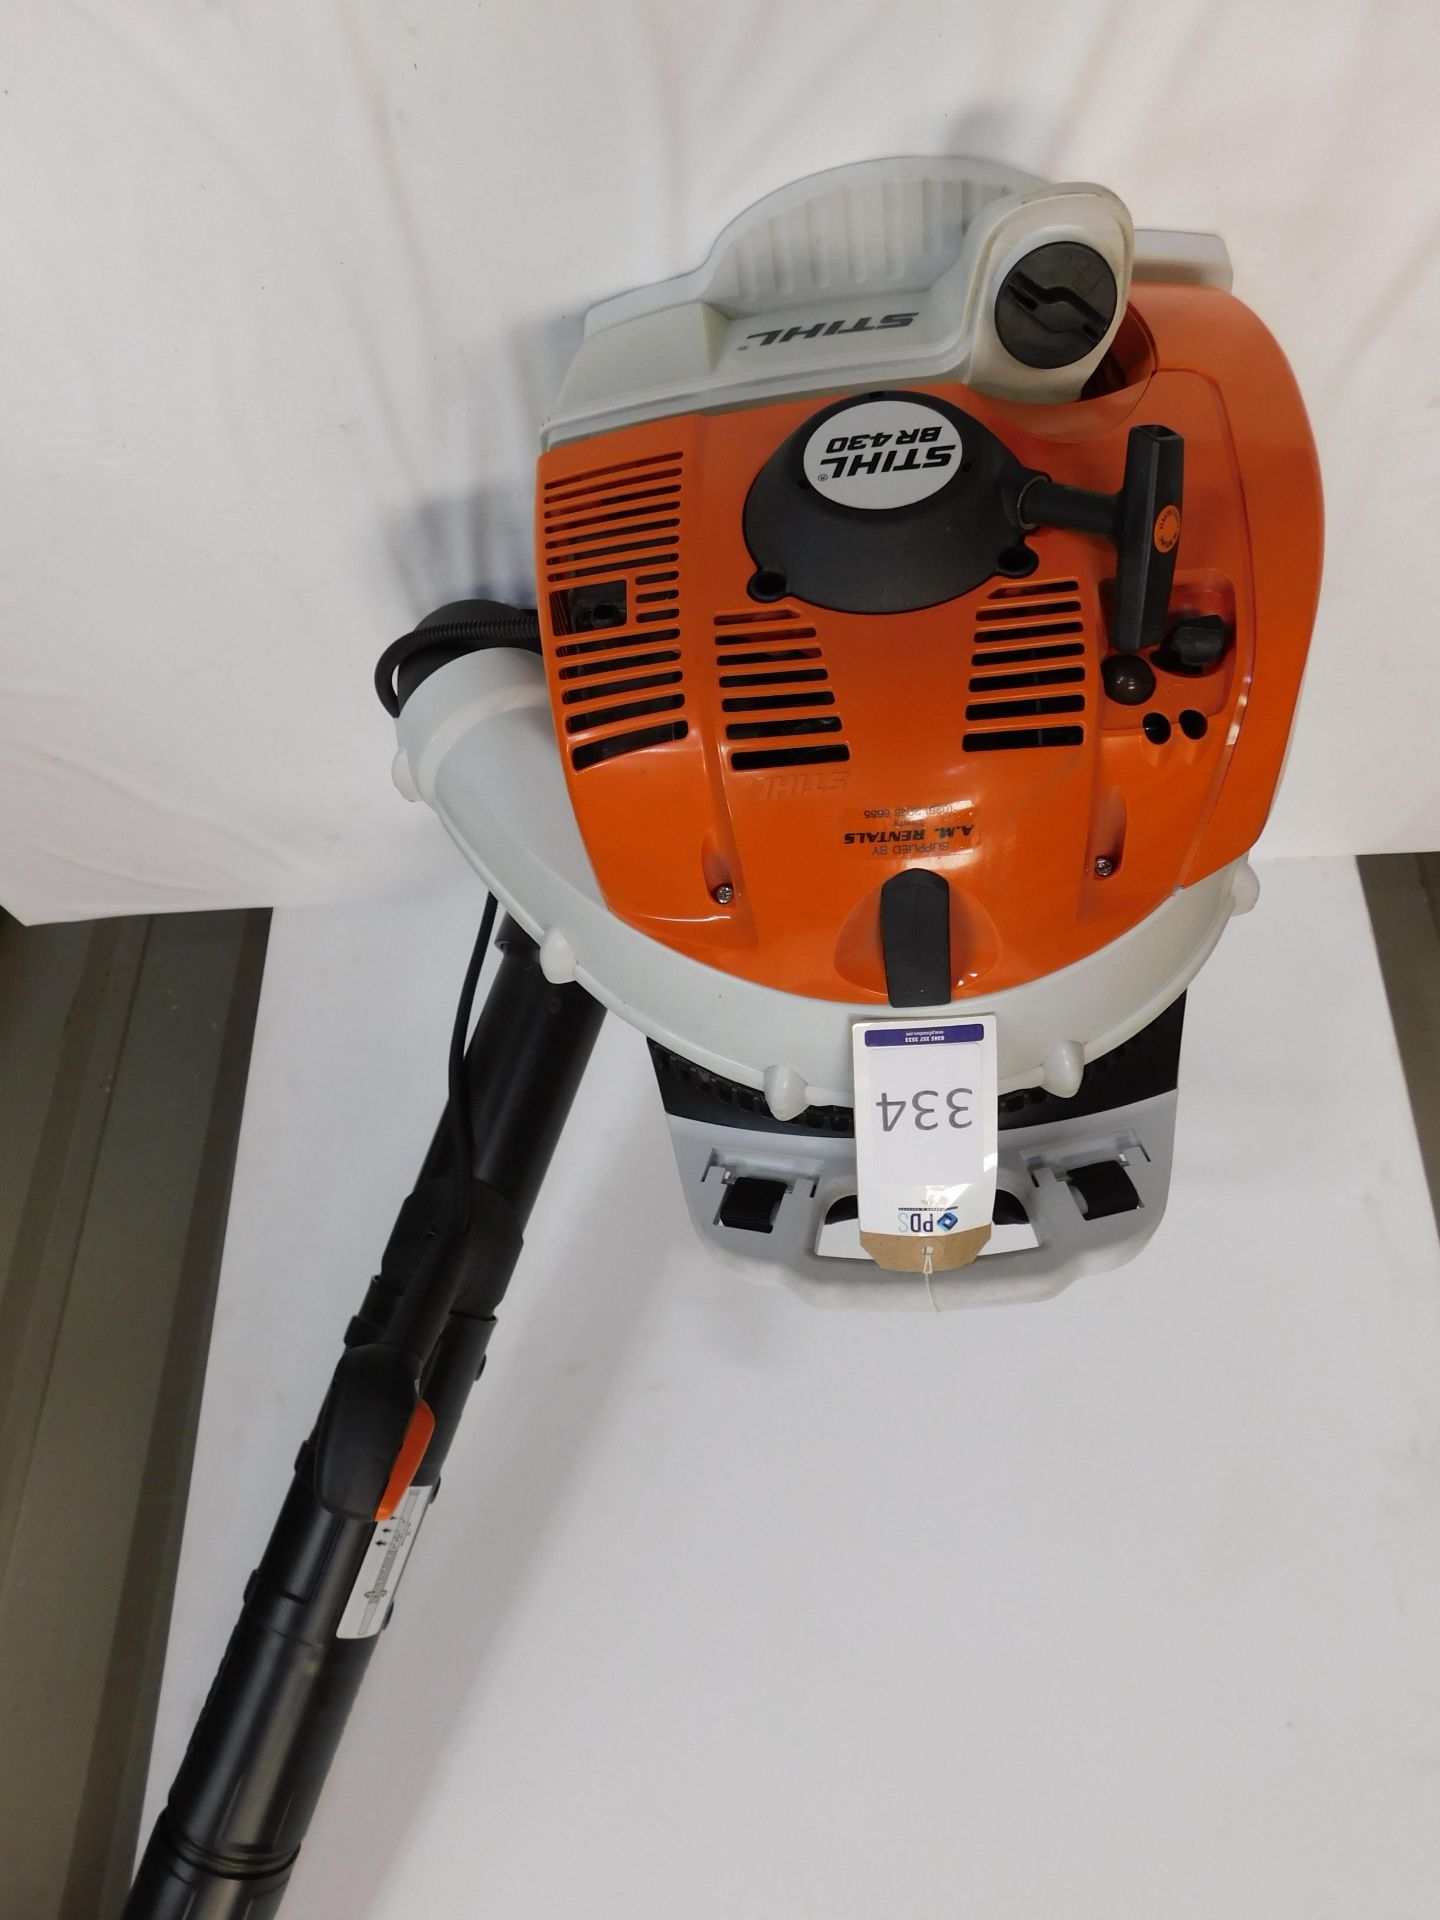 Stihl BR430 Leaf Blower (Location: Brentwood. Please Refer to General Notes)